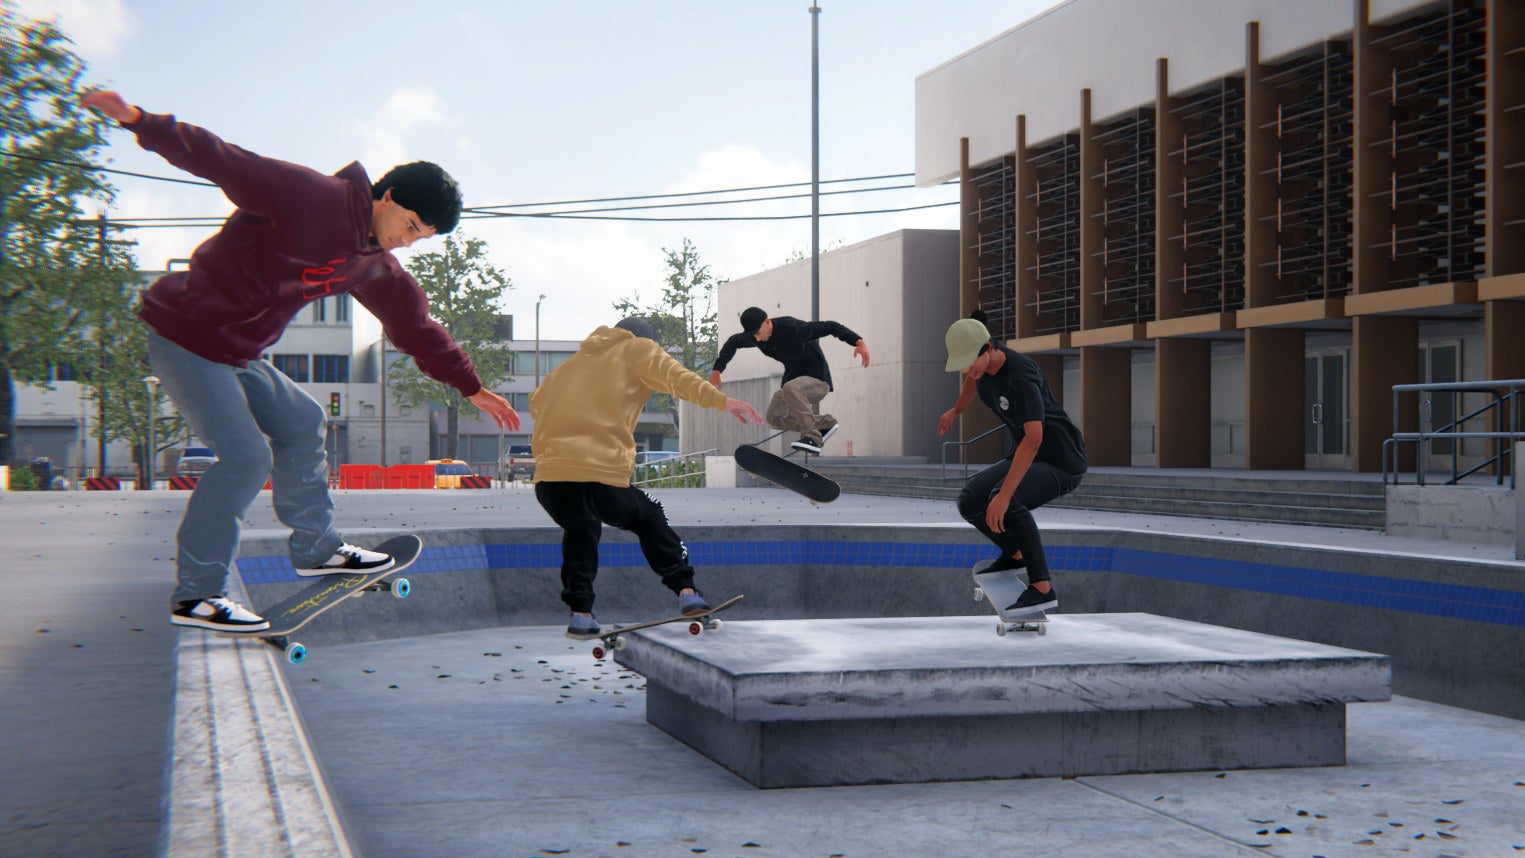 Four people skating together outside a building in a Skater XL multiplayer beta screenshot.